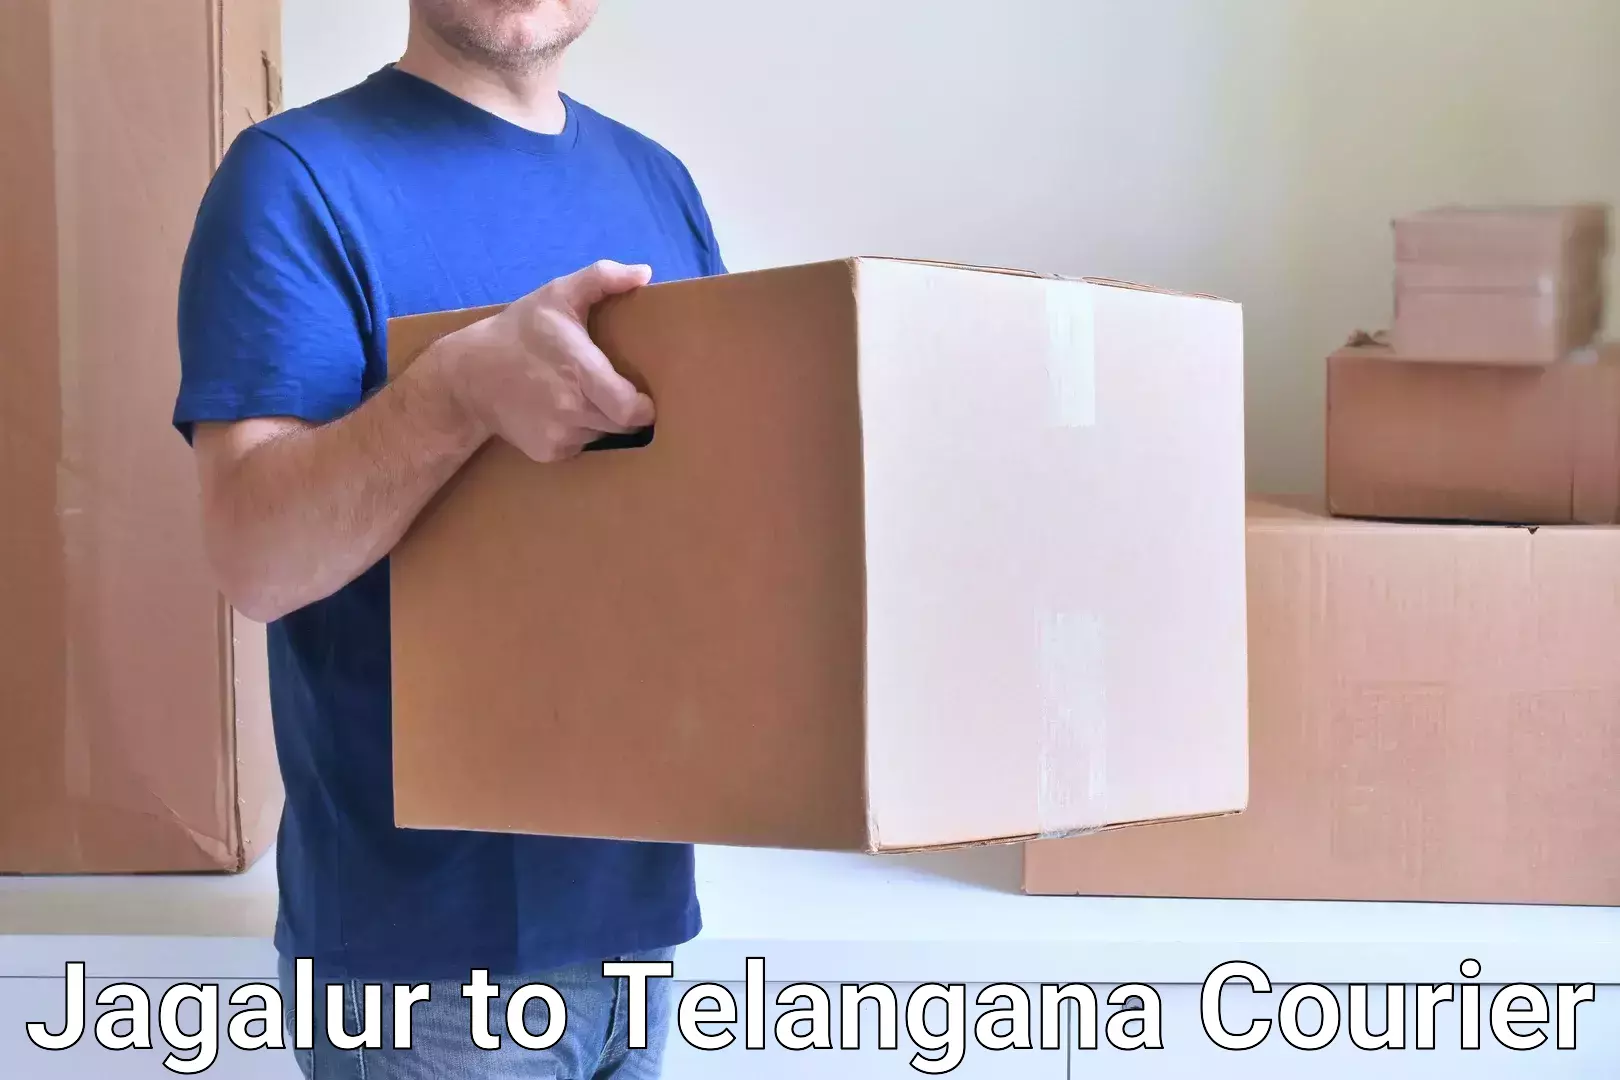 Courier service innovation Jagalur to Sultanabad